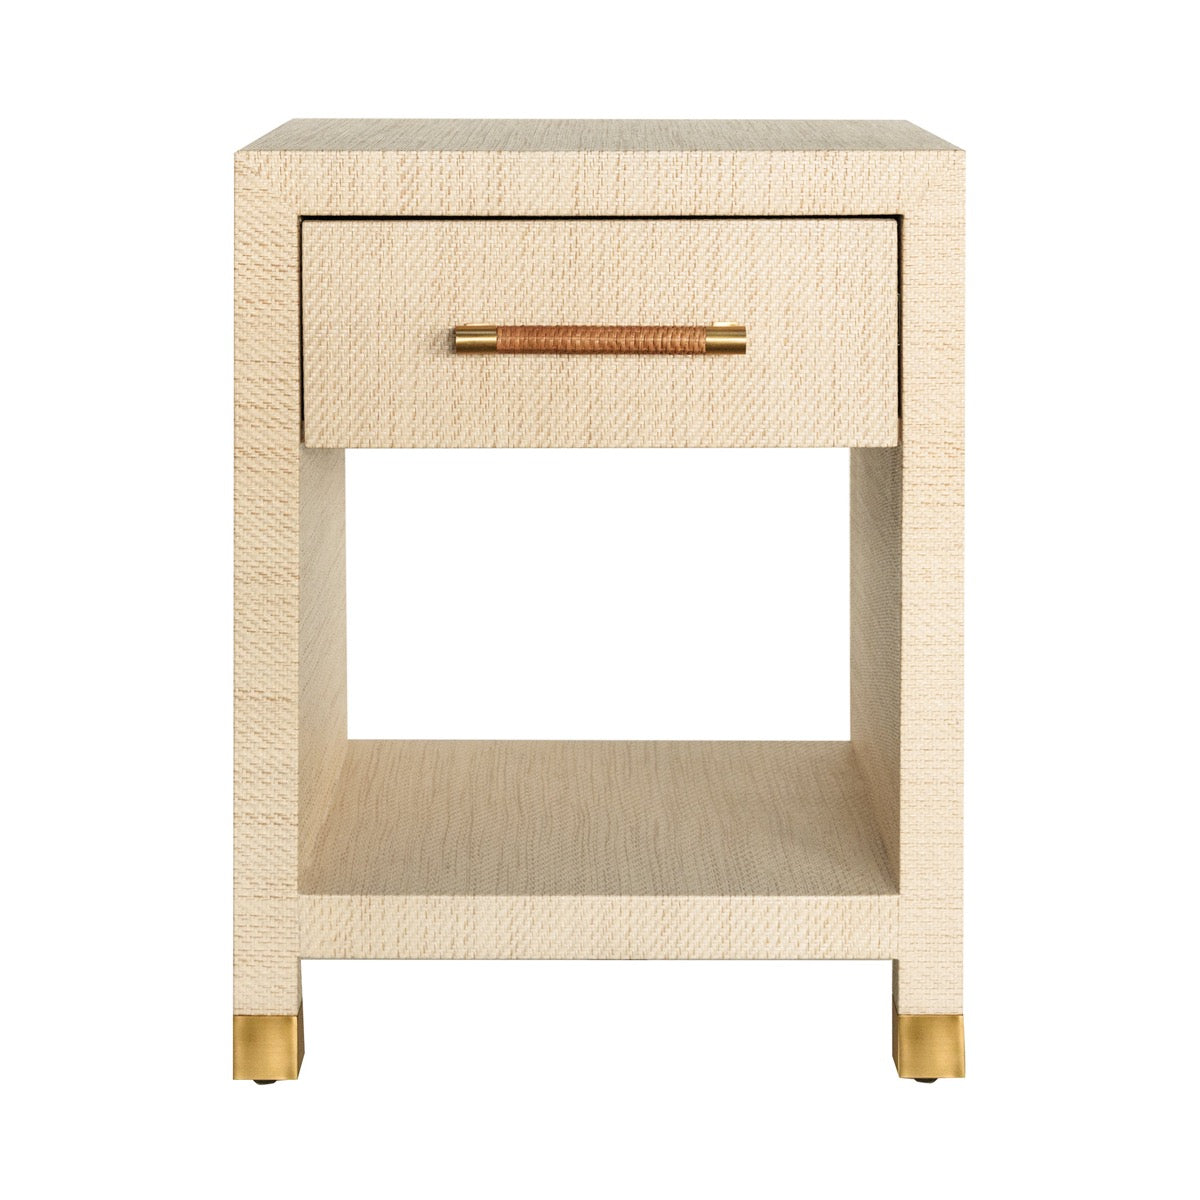 Charleston Side Table - 1 Drawer Matte White Lacquer. Front view.